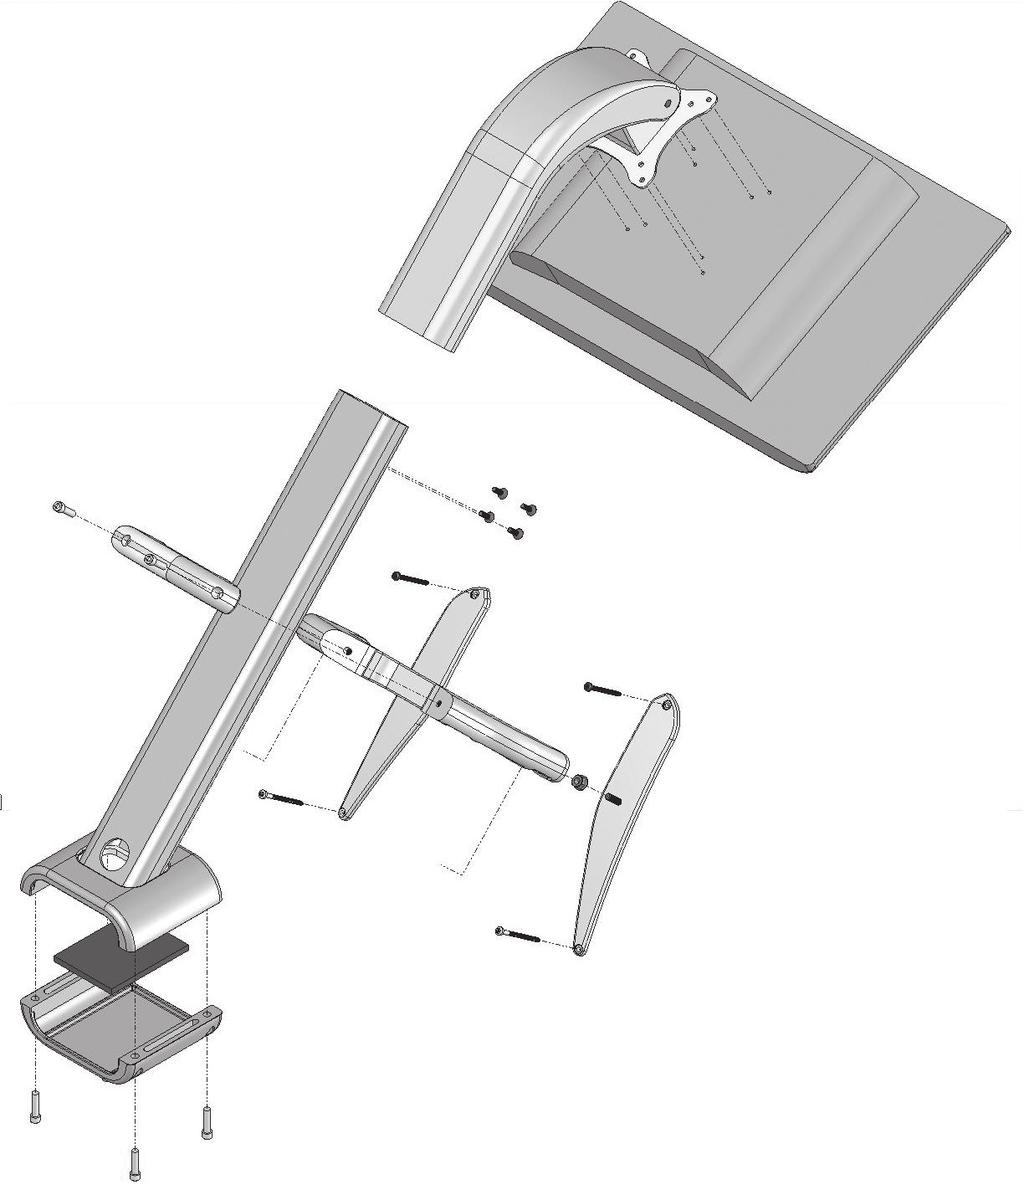 Steps in Assembling the Bracket All Treadmills This pictorial view shows the